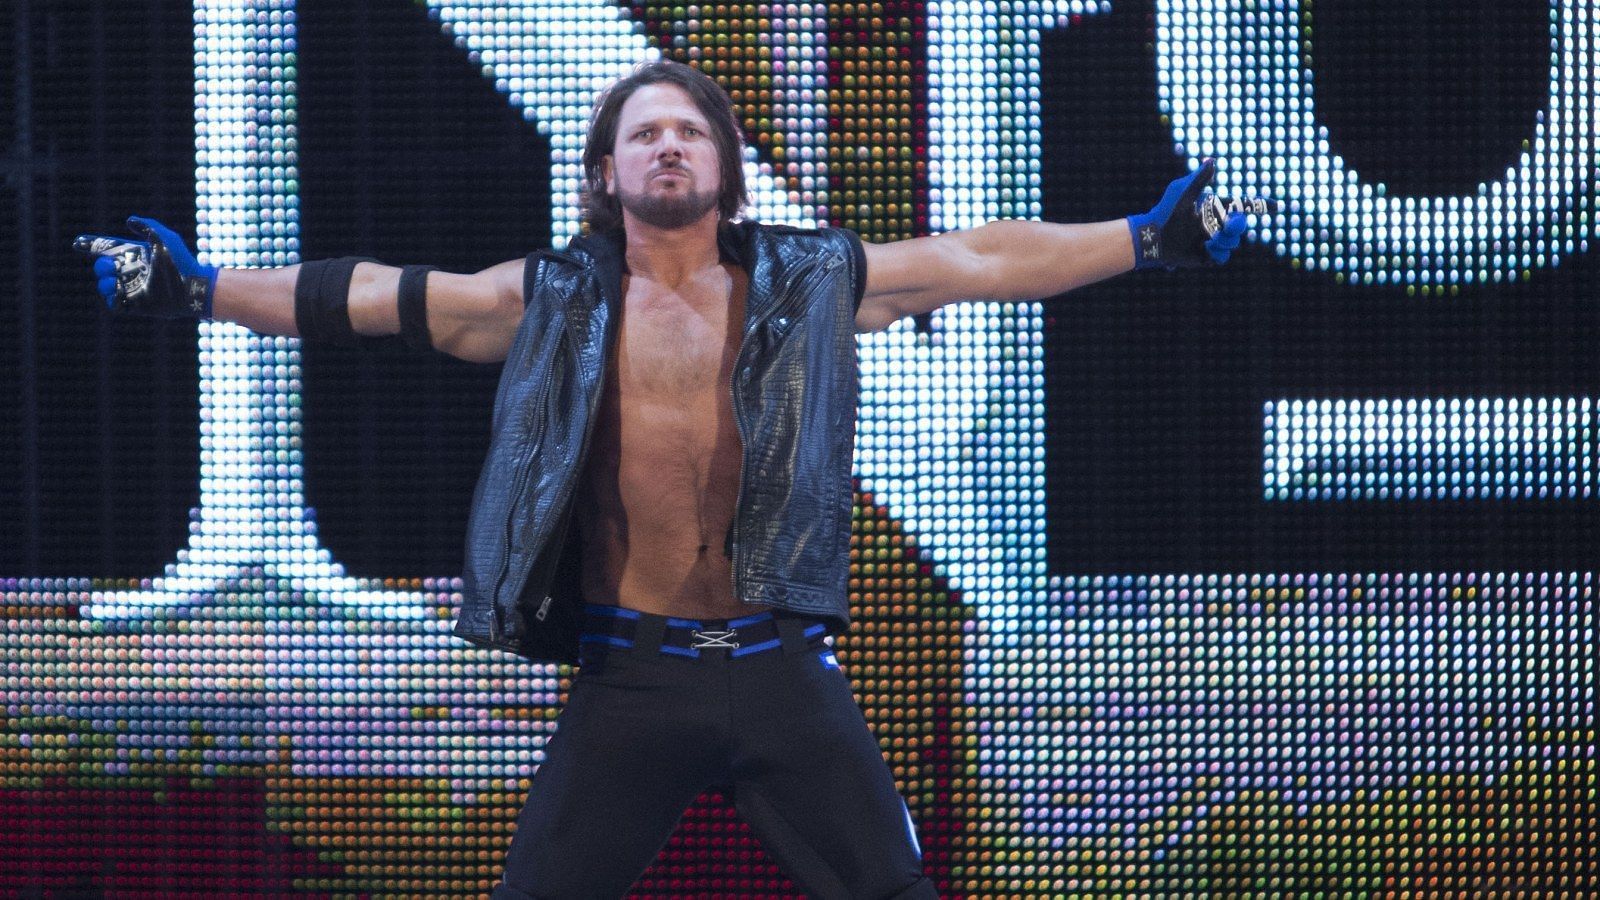 AJ Styles was given permission to record a heartfelt video for his longtime home in IMPACT